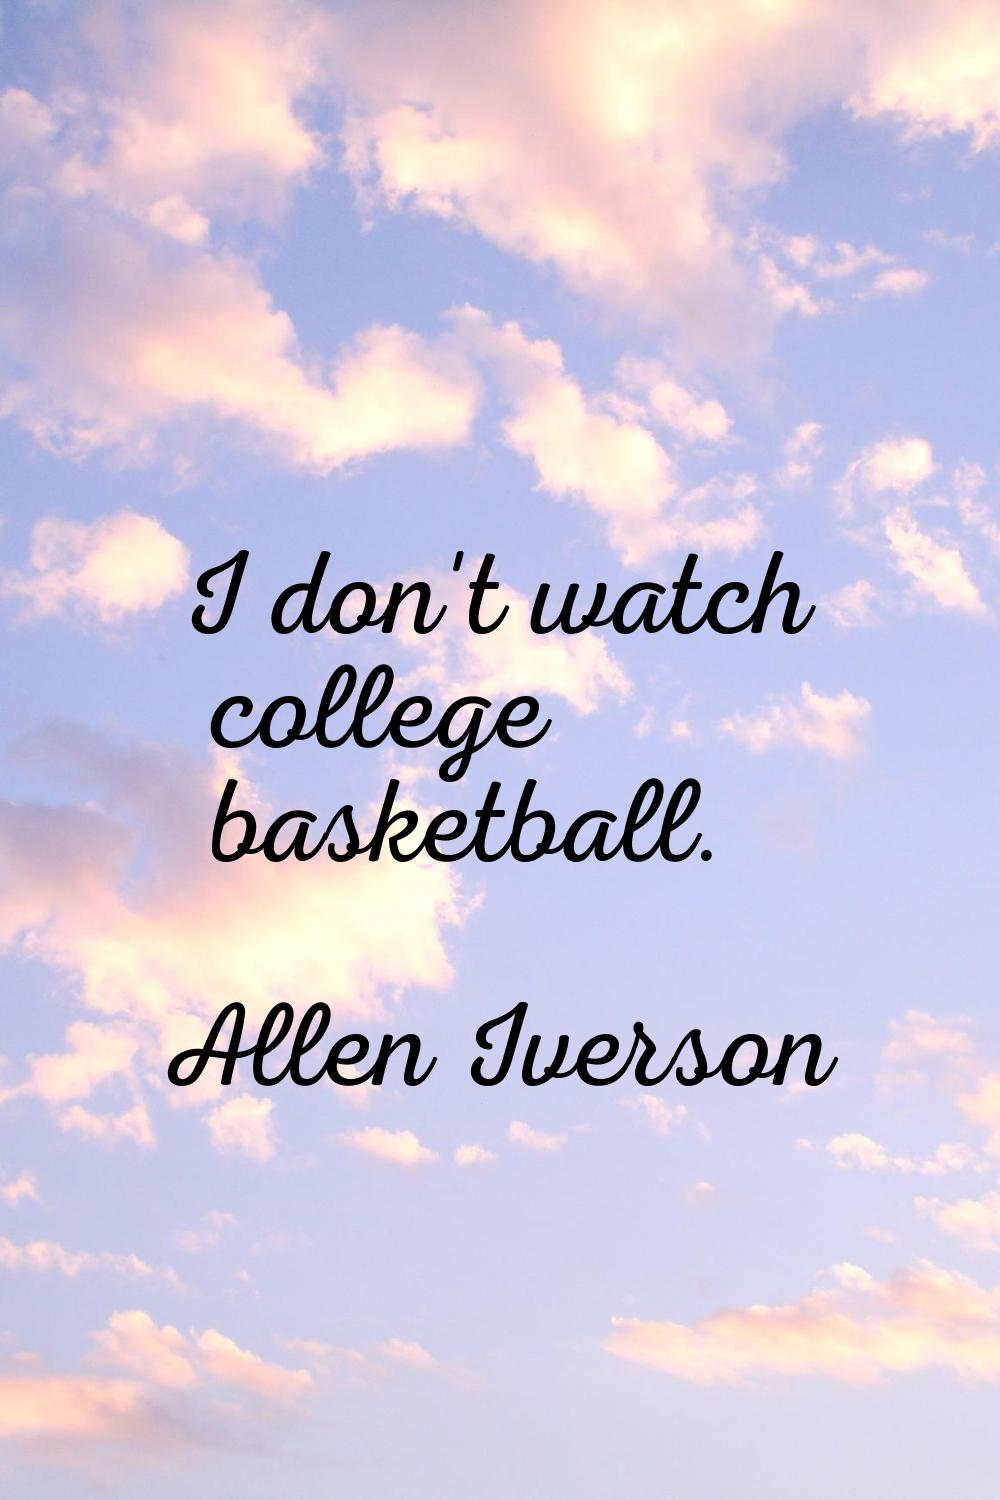 I don't watch college basketball.